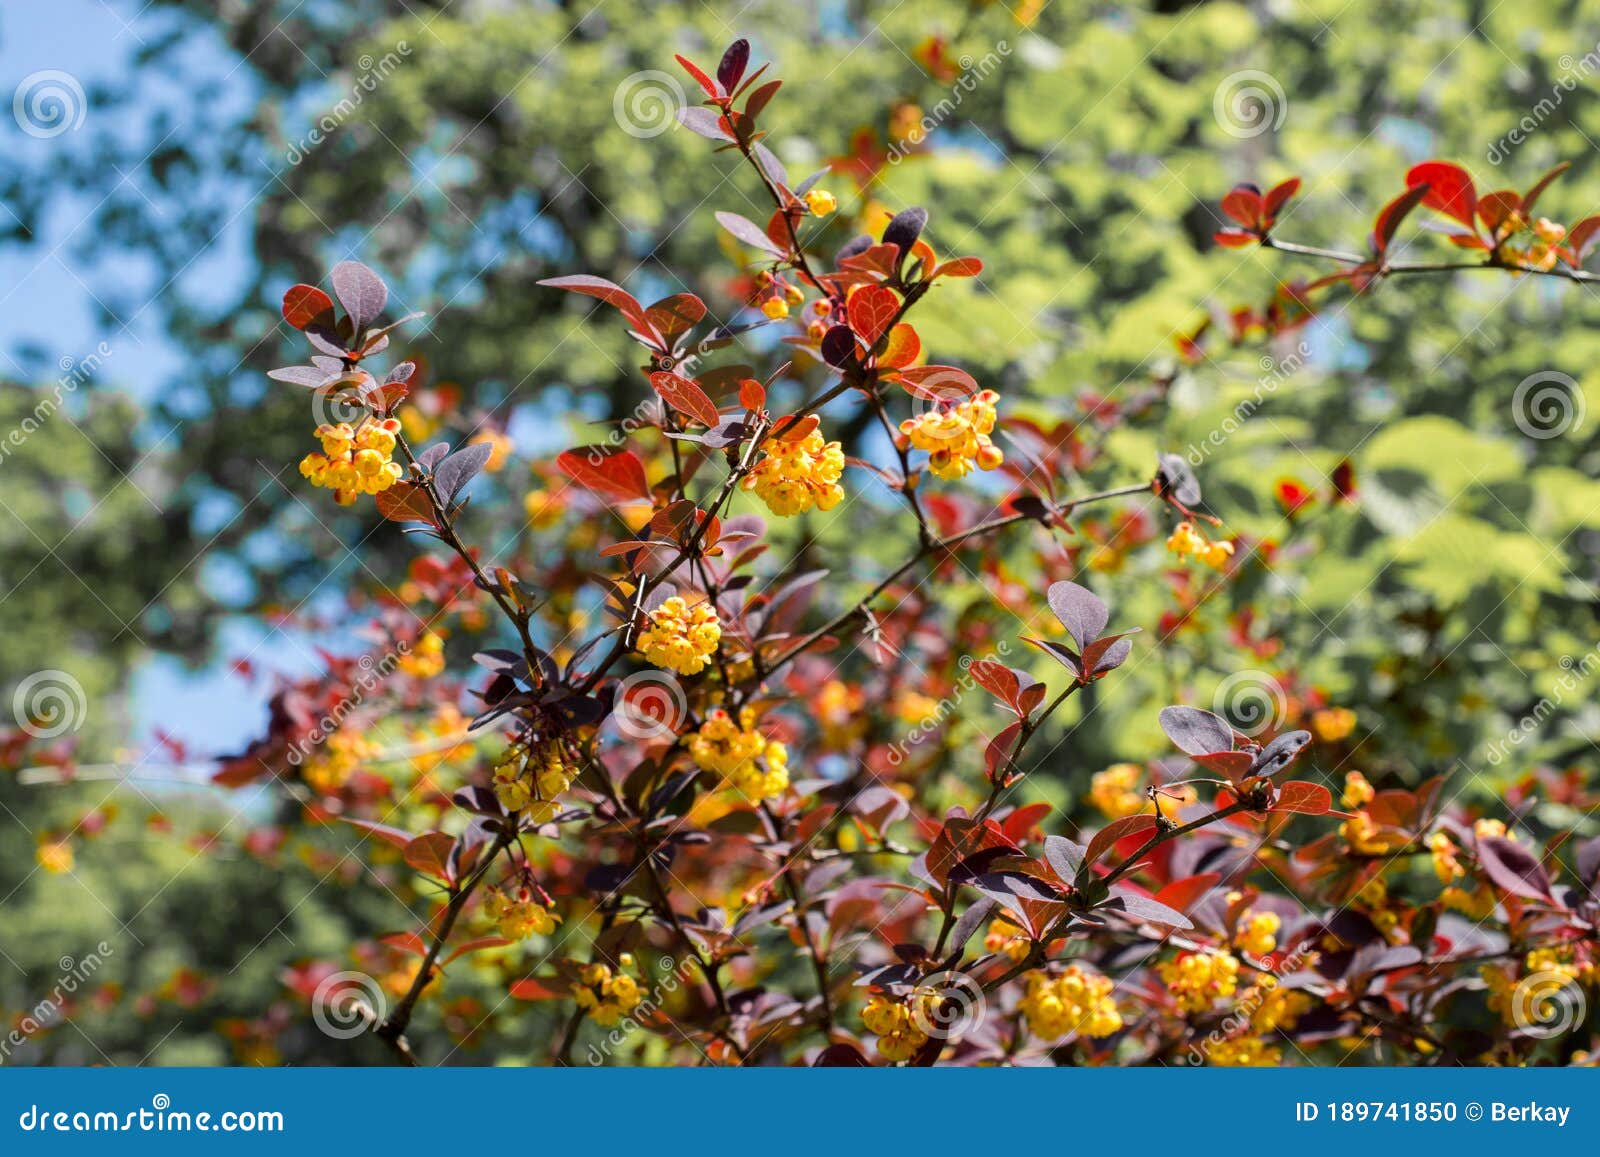 Flowers Bloom in the Spring in Trees Stock Photo - Image of beauty ...